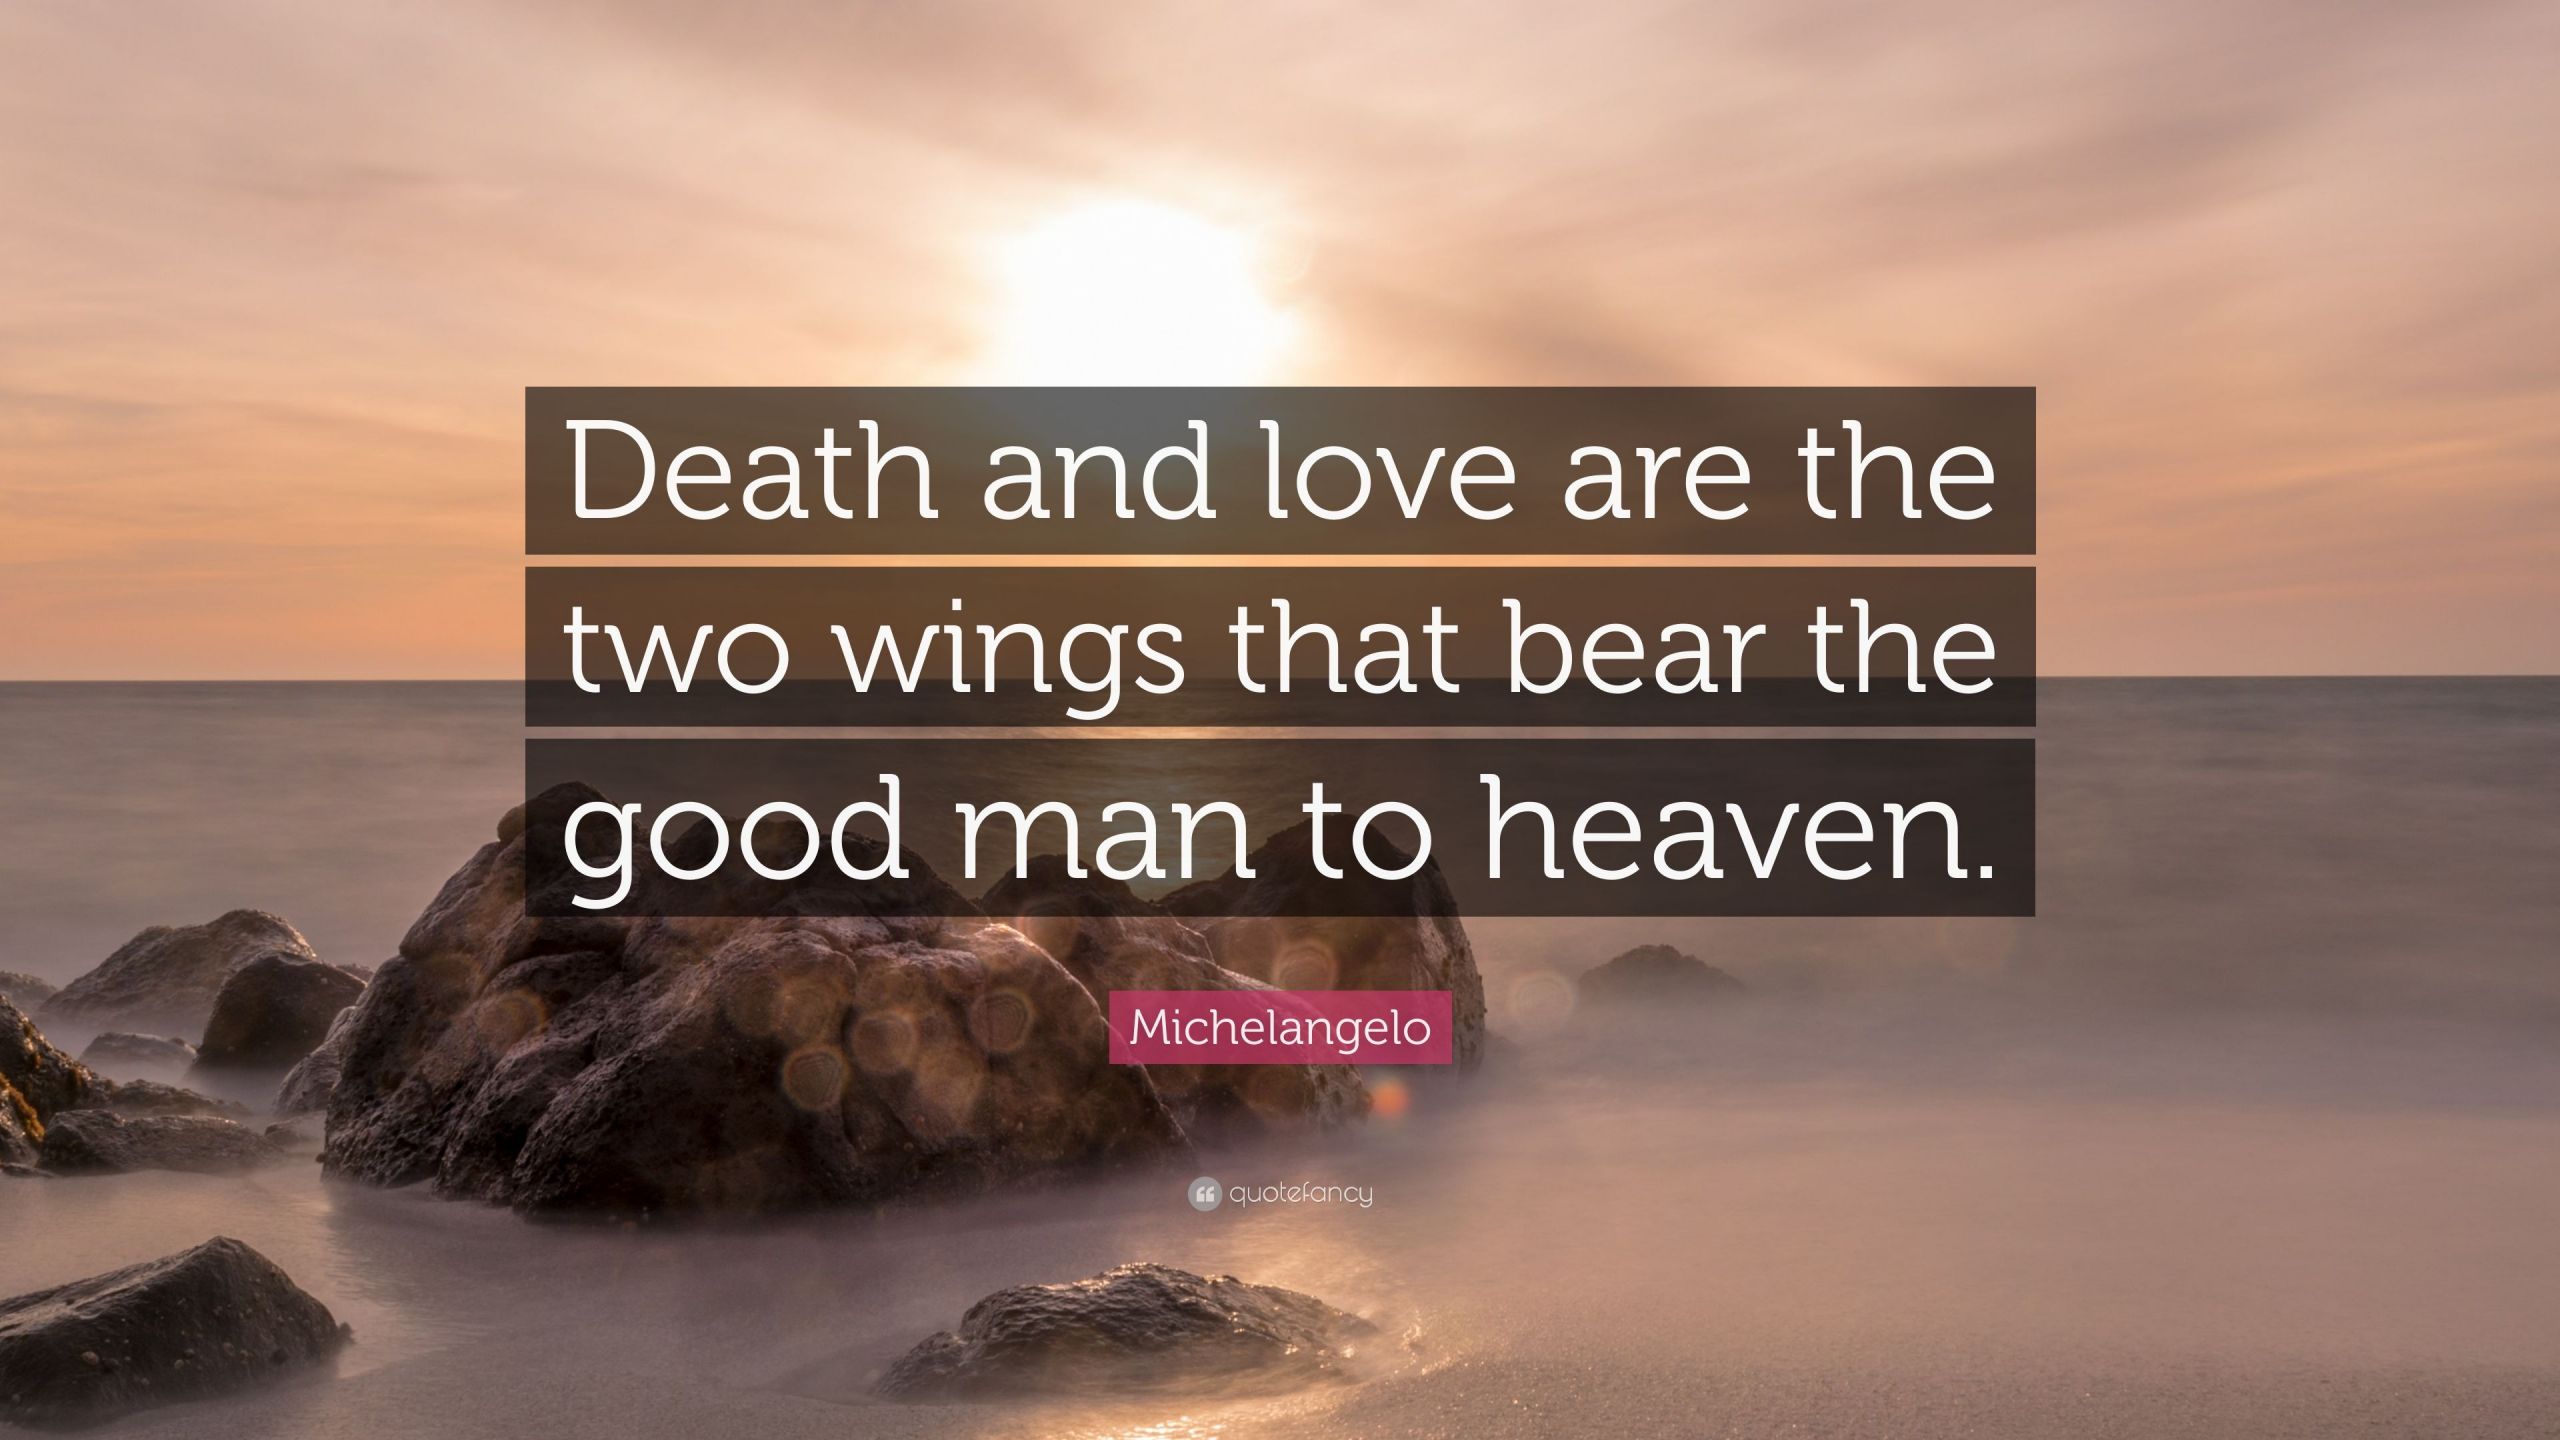 Love And Death Quotes
 Michelangelo Quote “Death and love are the two wings that